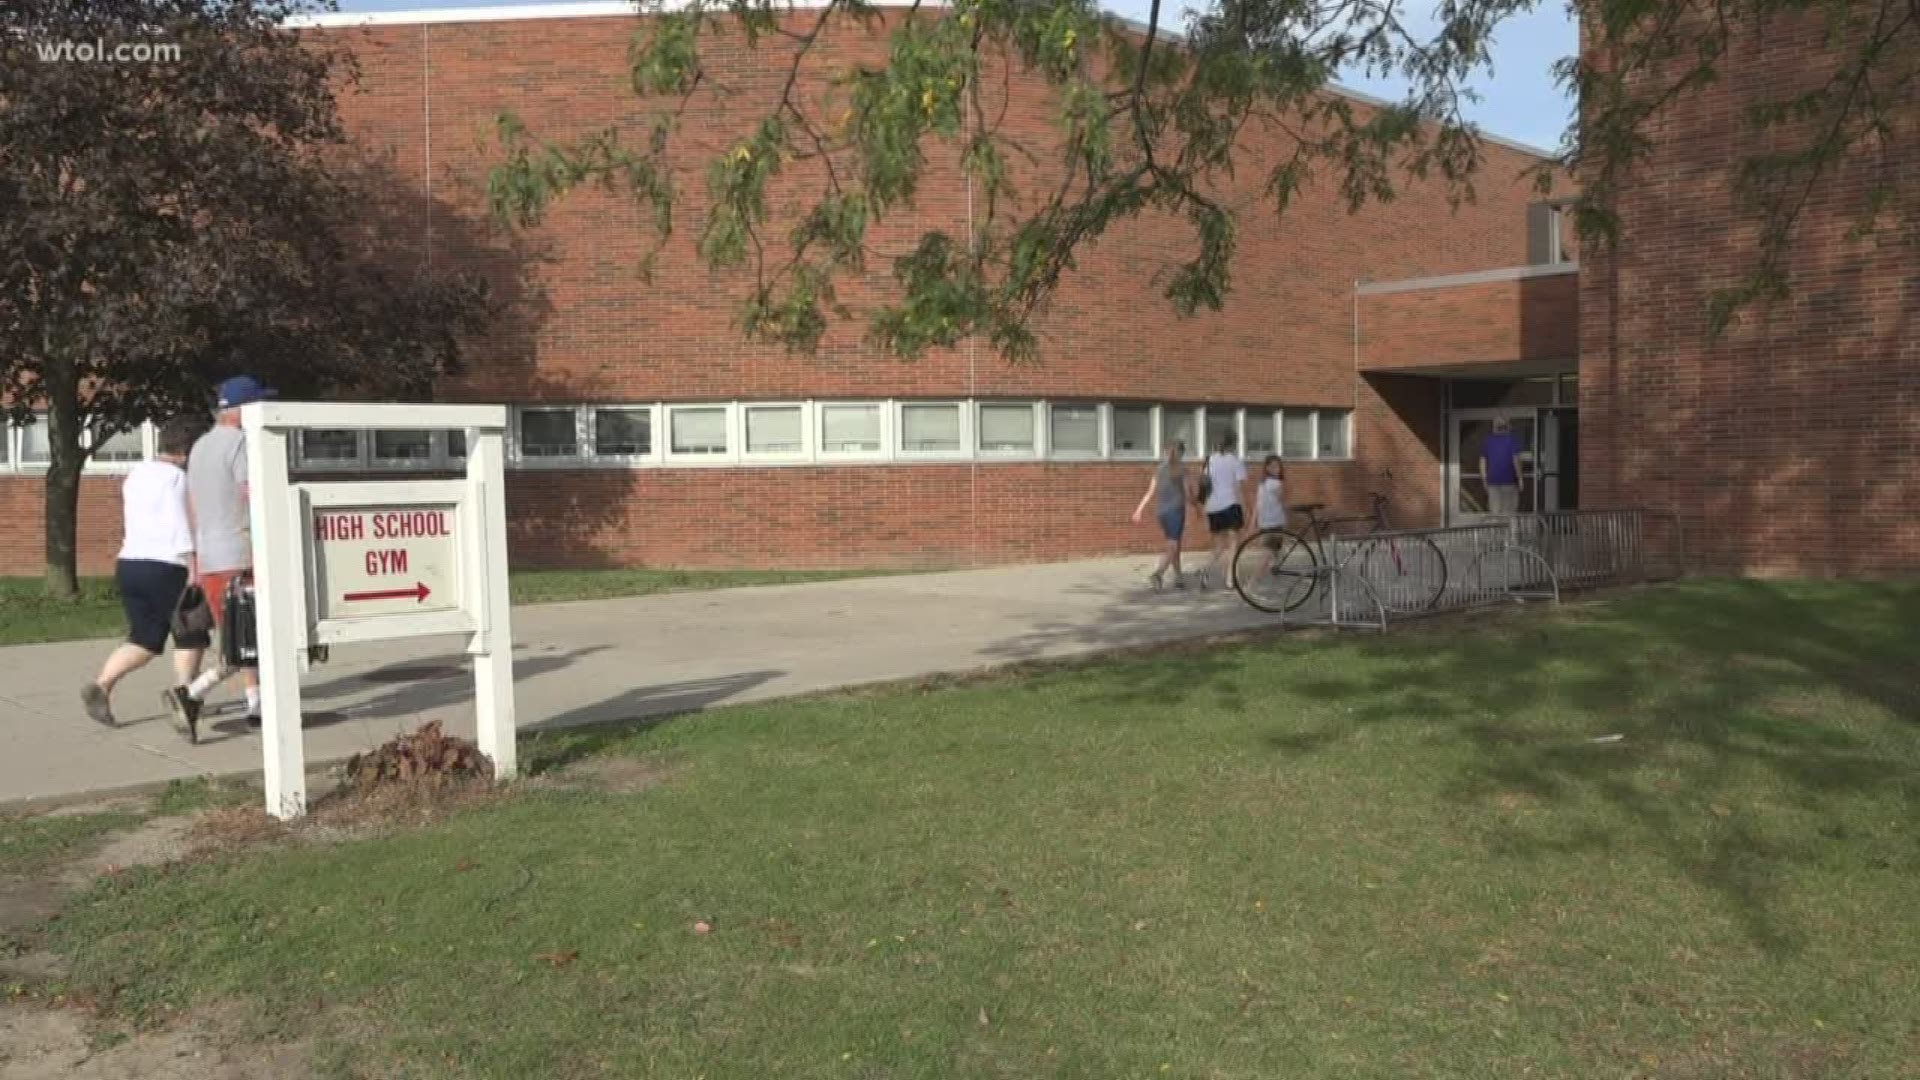 With temperatures around the 90-degree mark Tuesday, schools in BG were hot. Some in the community hope voters will consider that when voting on a levy in November.